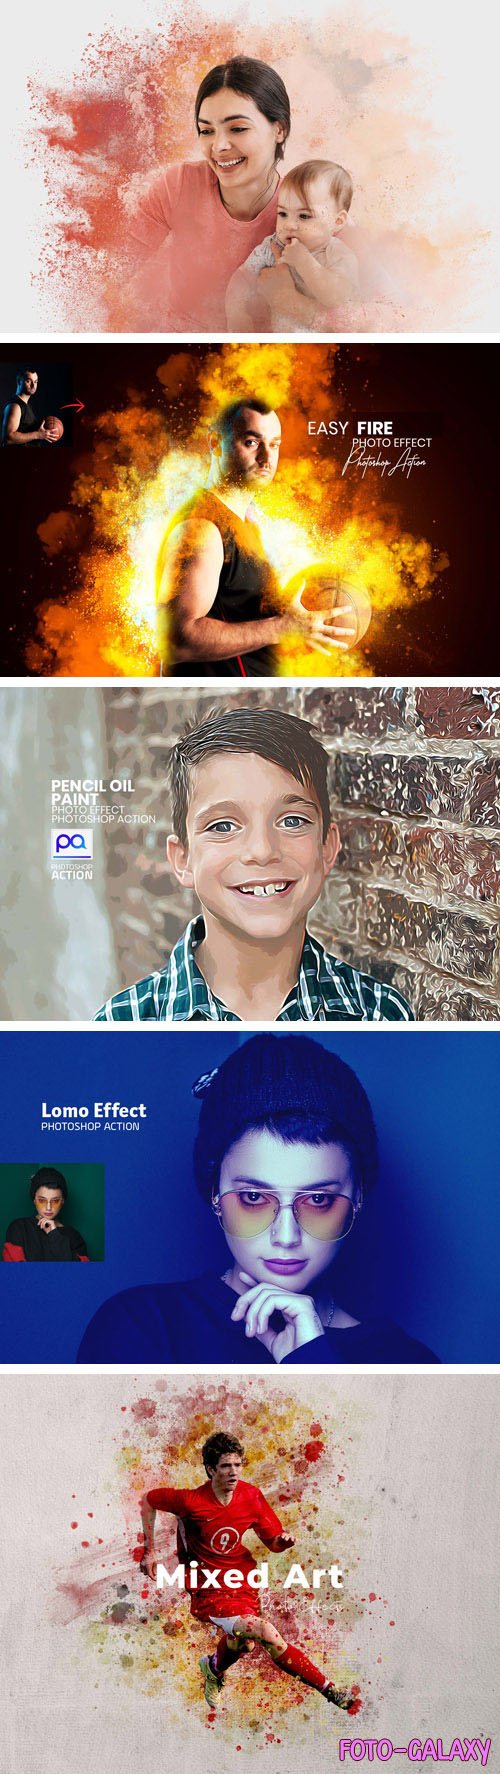 10 Best Photo Effects & Actions for Photoshop [Vol.3]